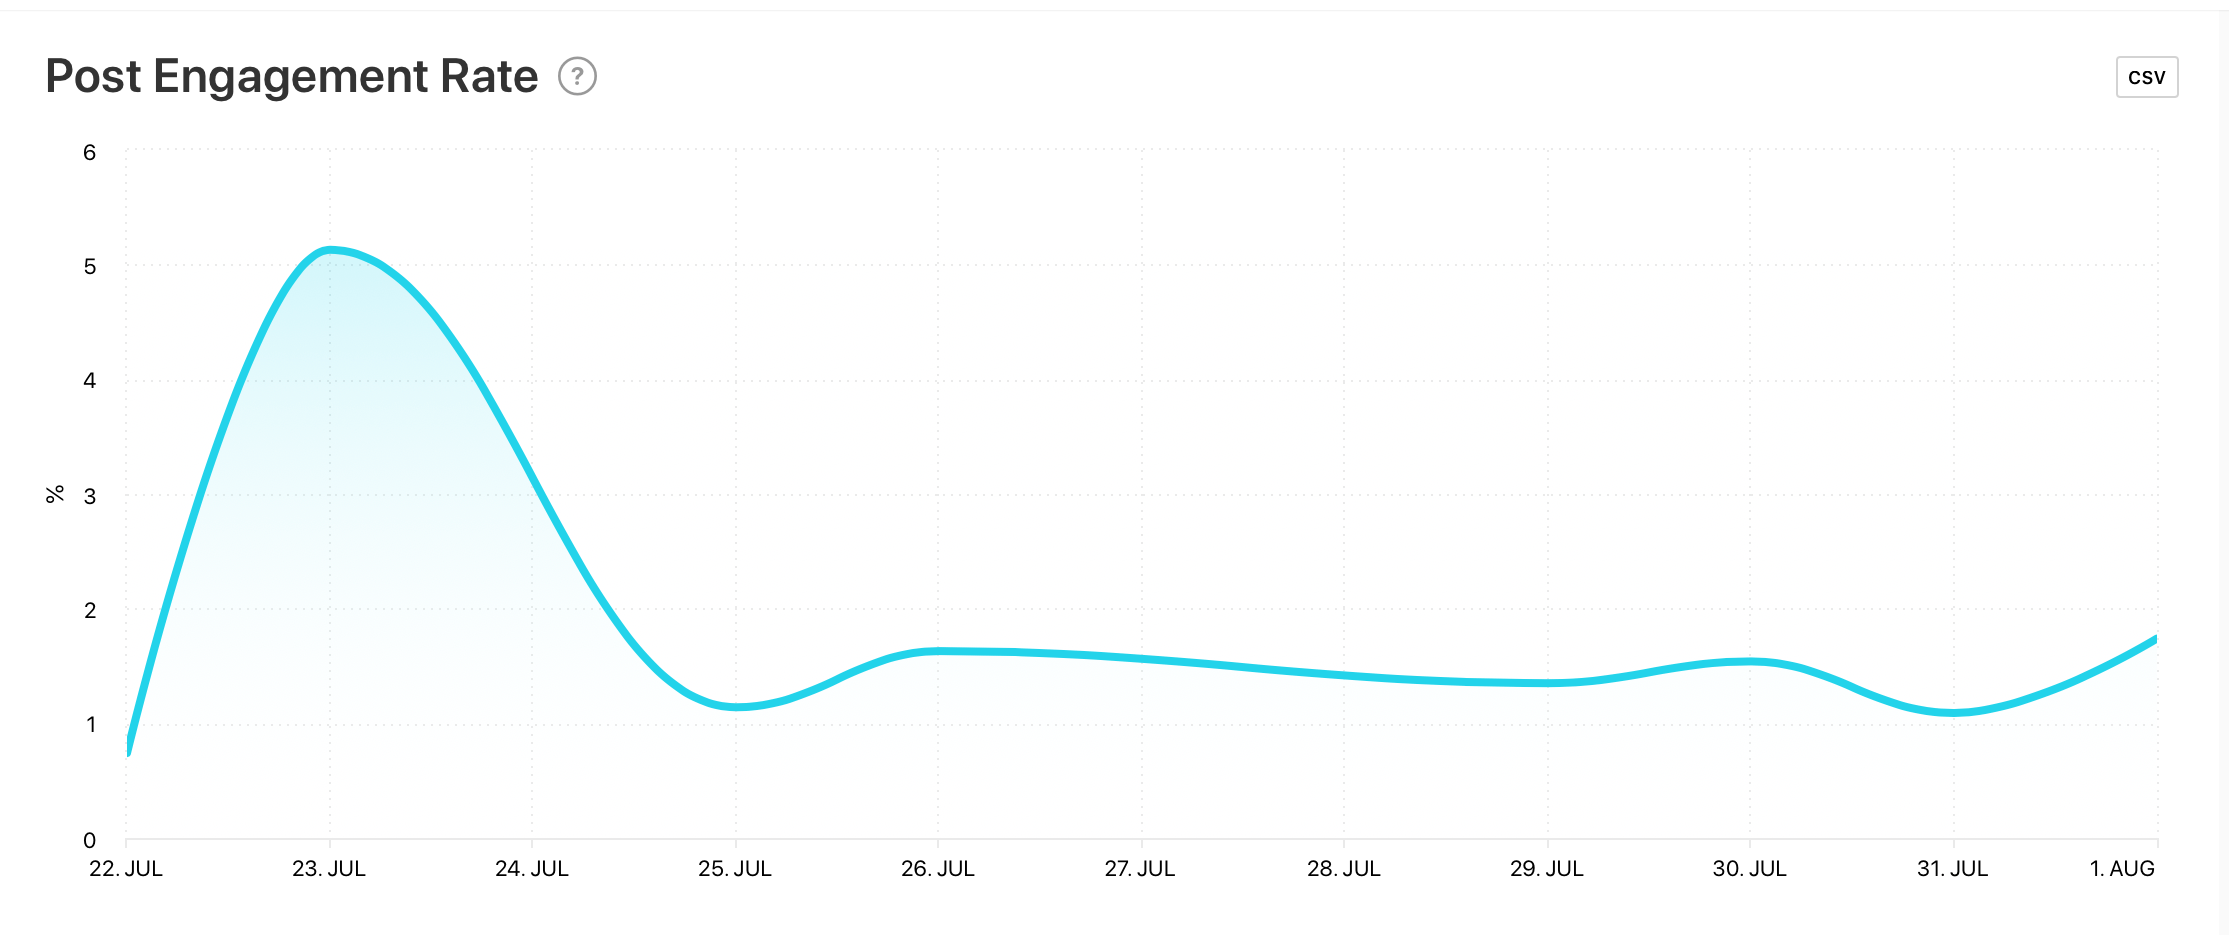 Post Engagement Rate graph by Minter.io